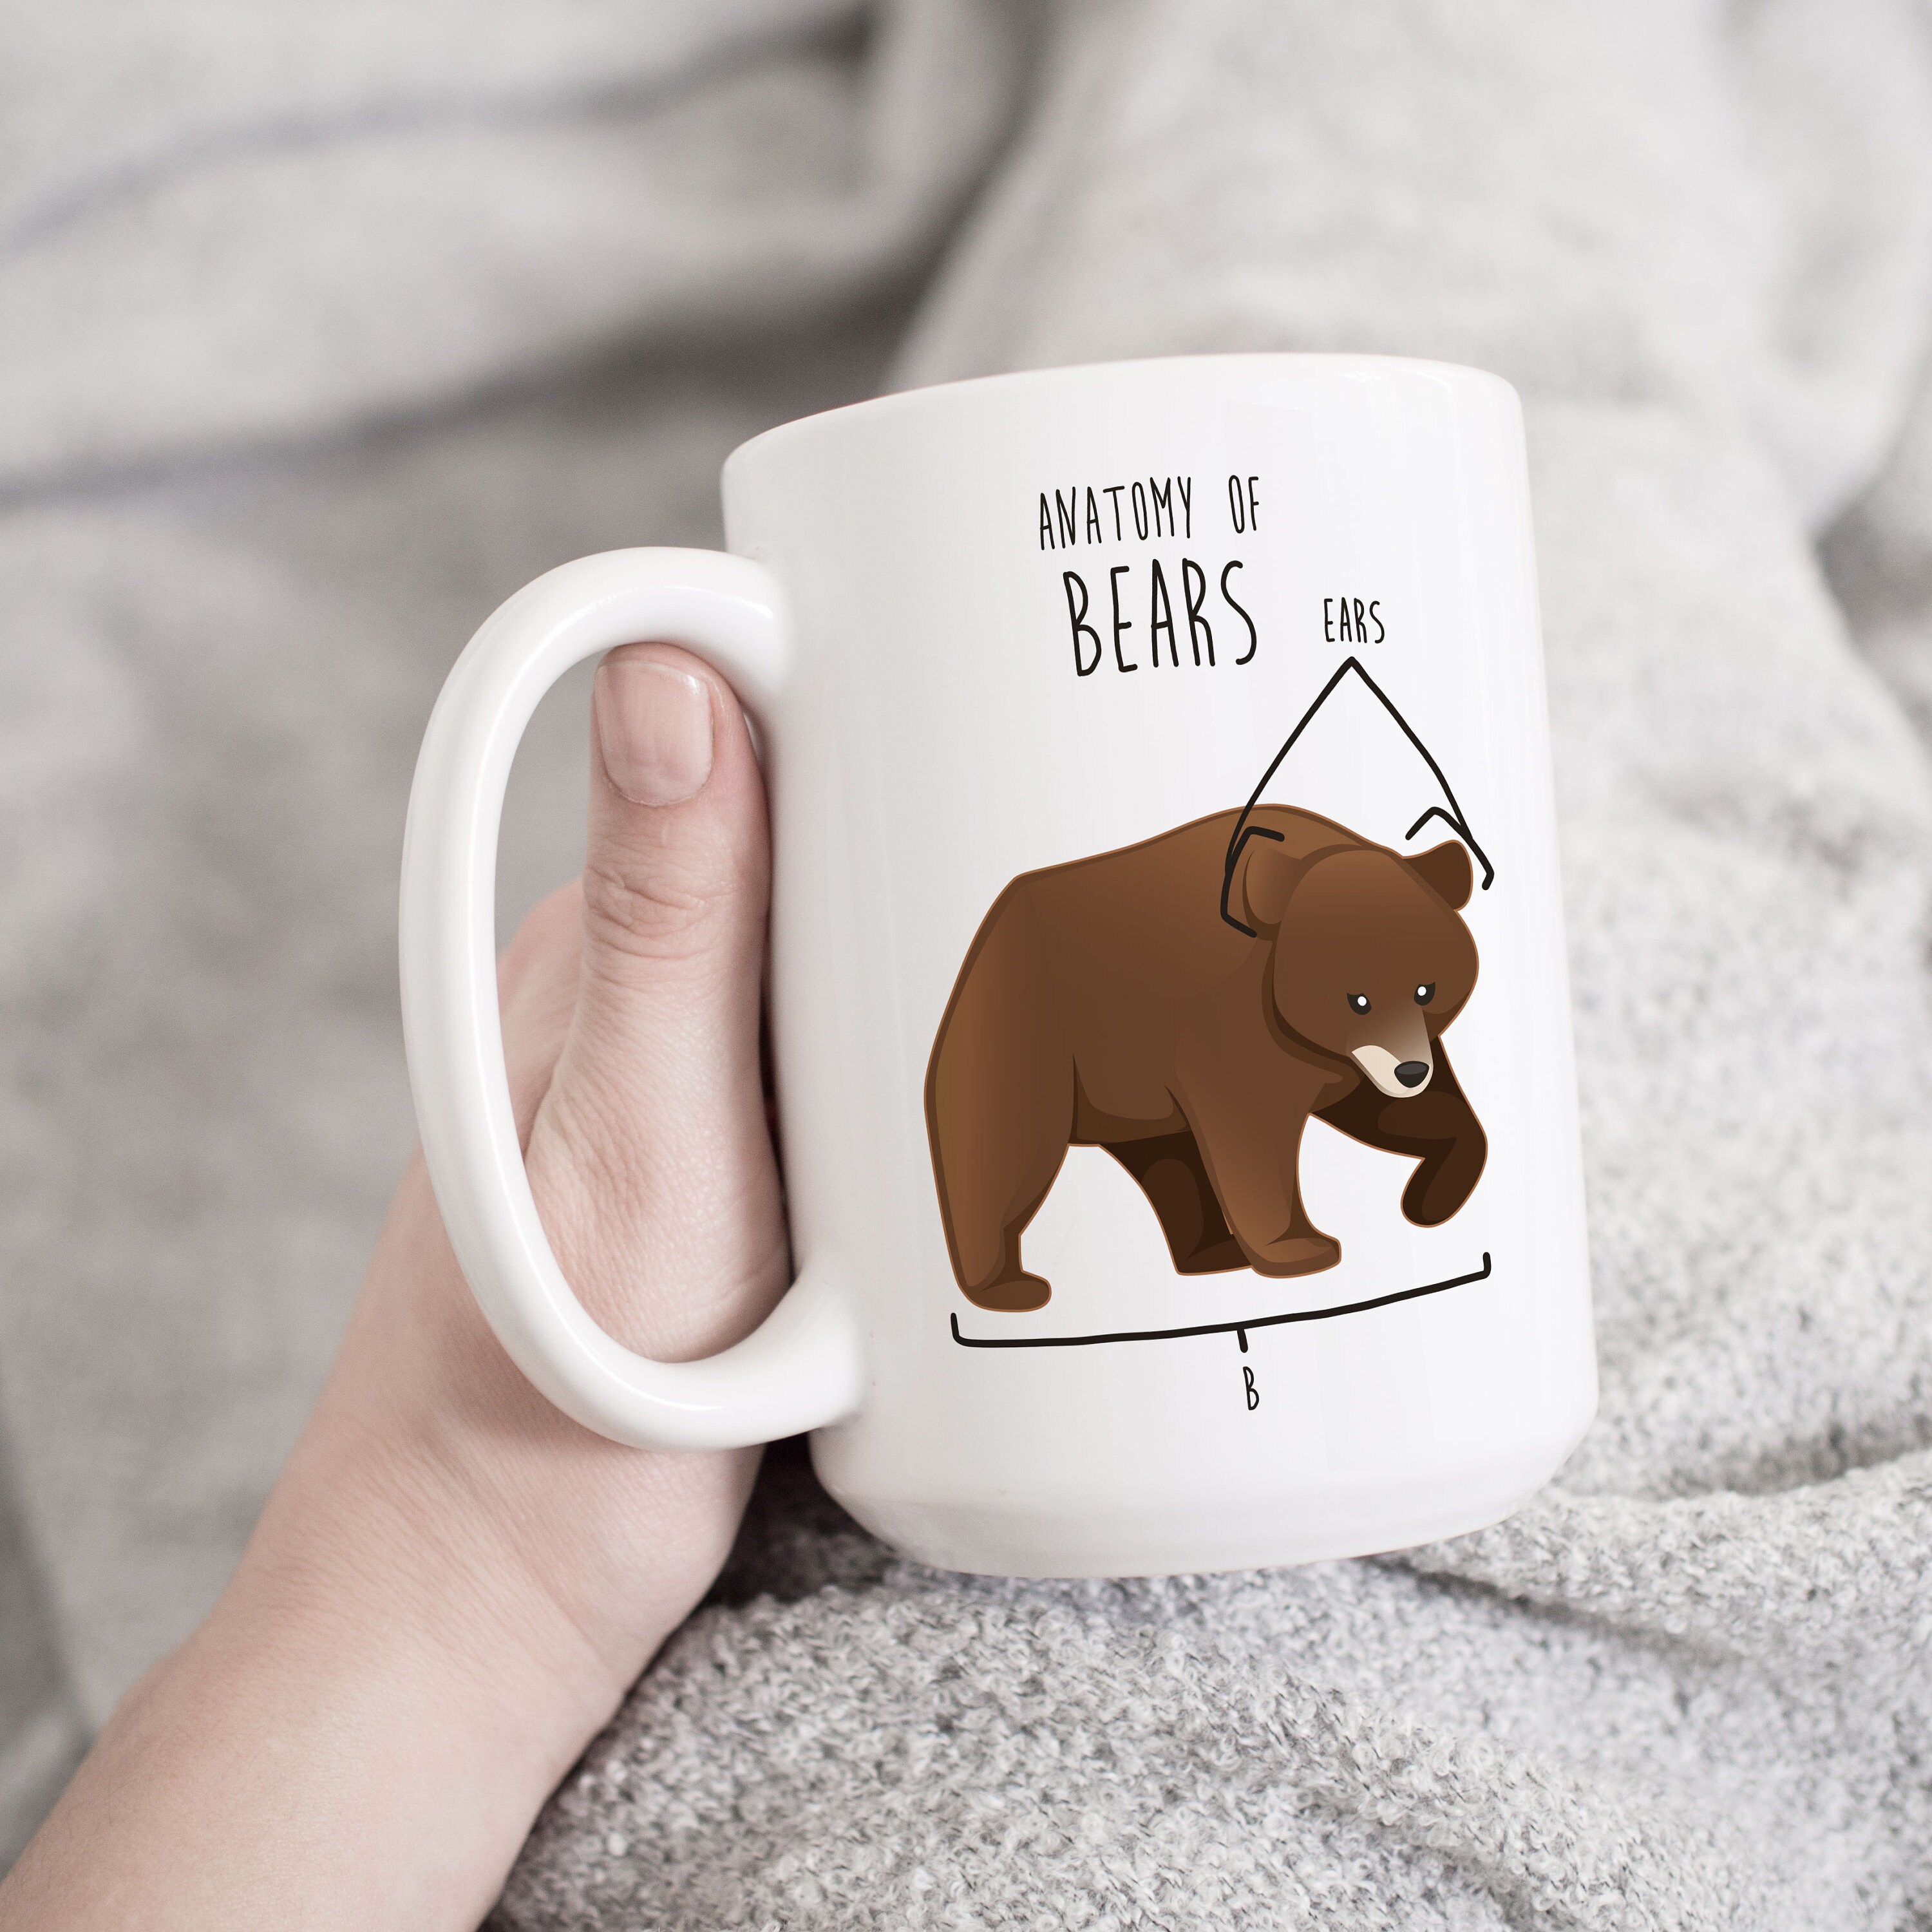 Bear Coffee Mug, Cute Bear Gift, Wild Animal Lover, Funny Wildlife Gifts  for Her, Him, Zoo Keeper Zoologist, Nature Meme, Grizzly Brown Bear 